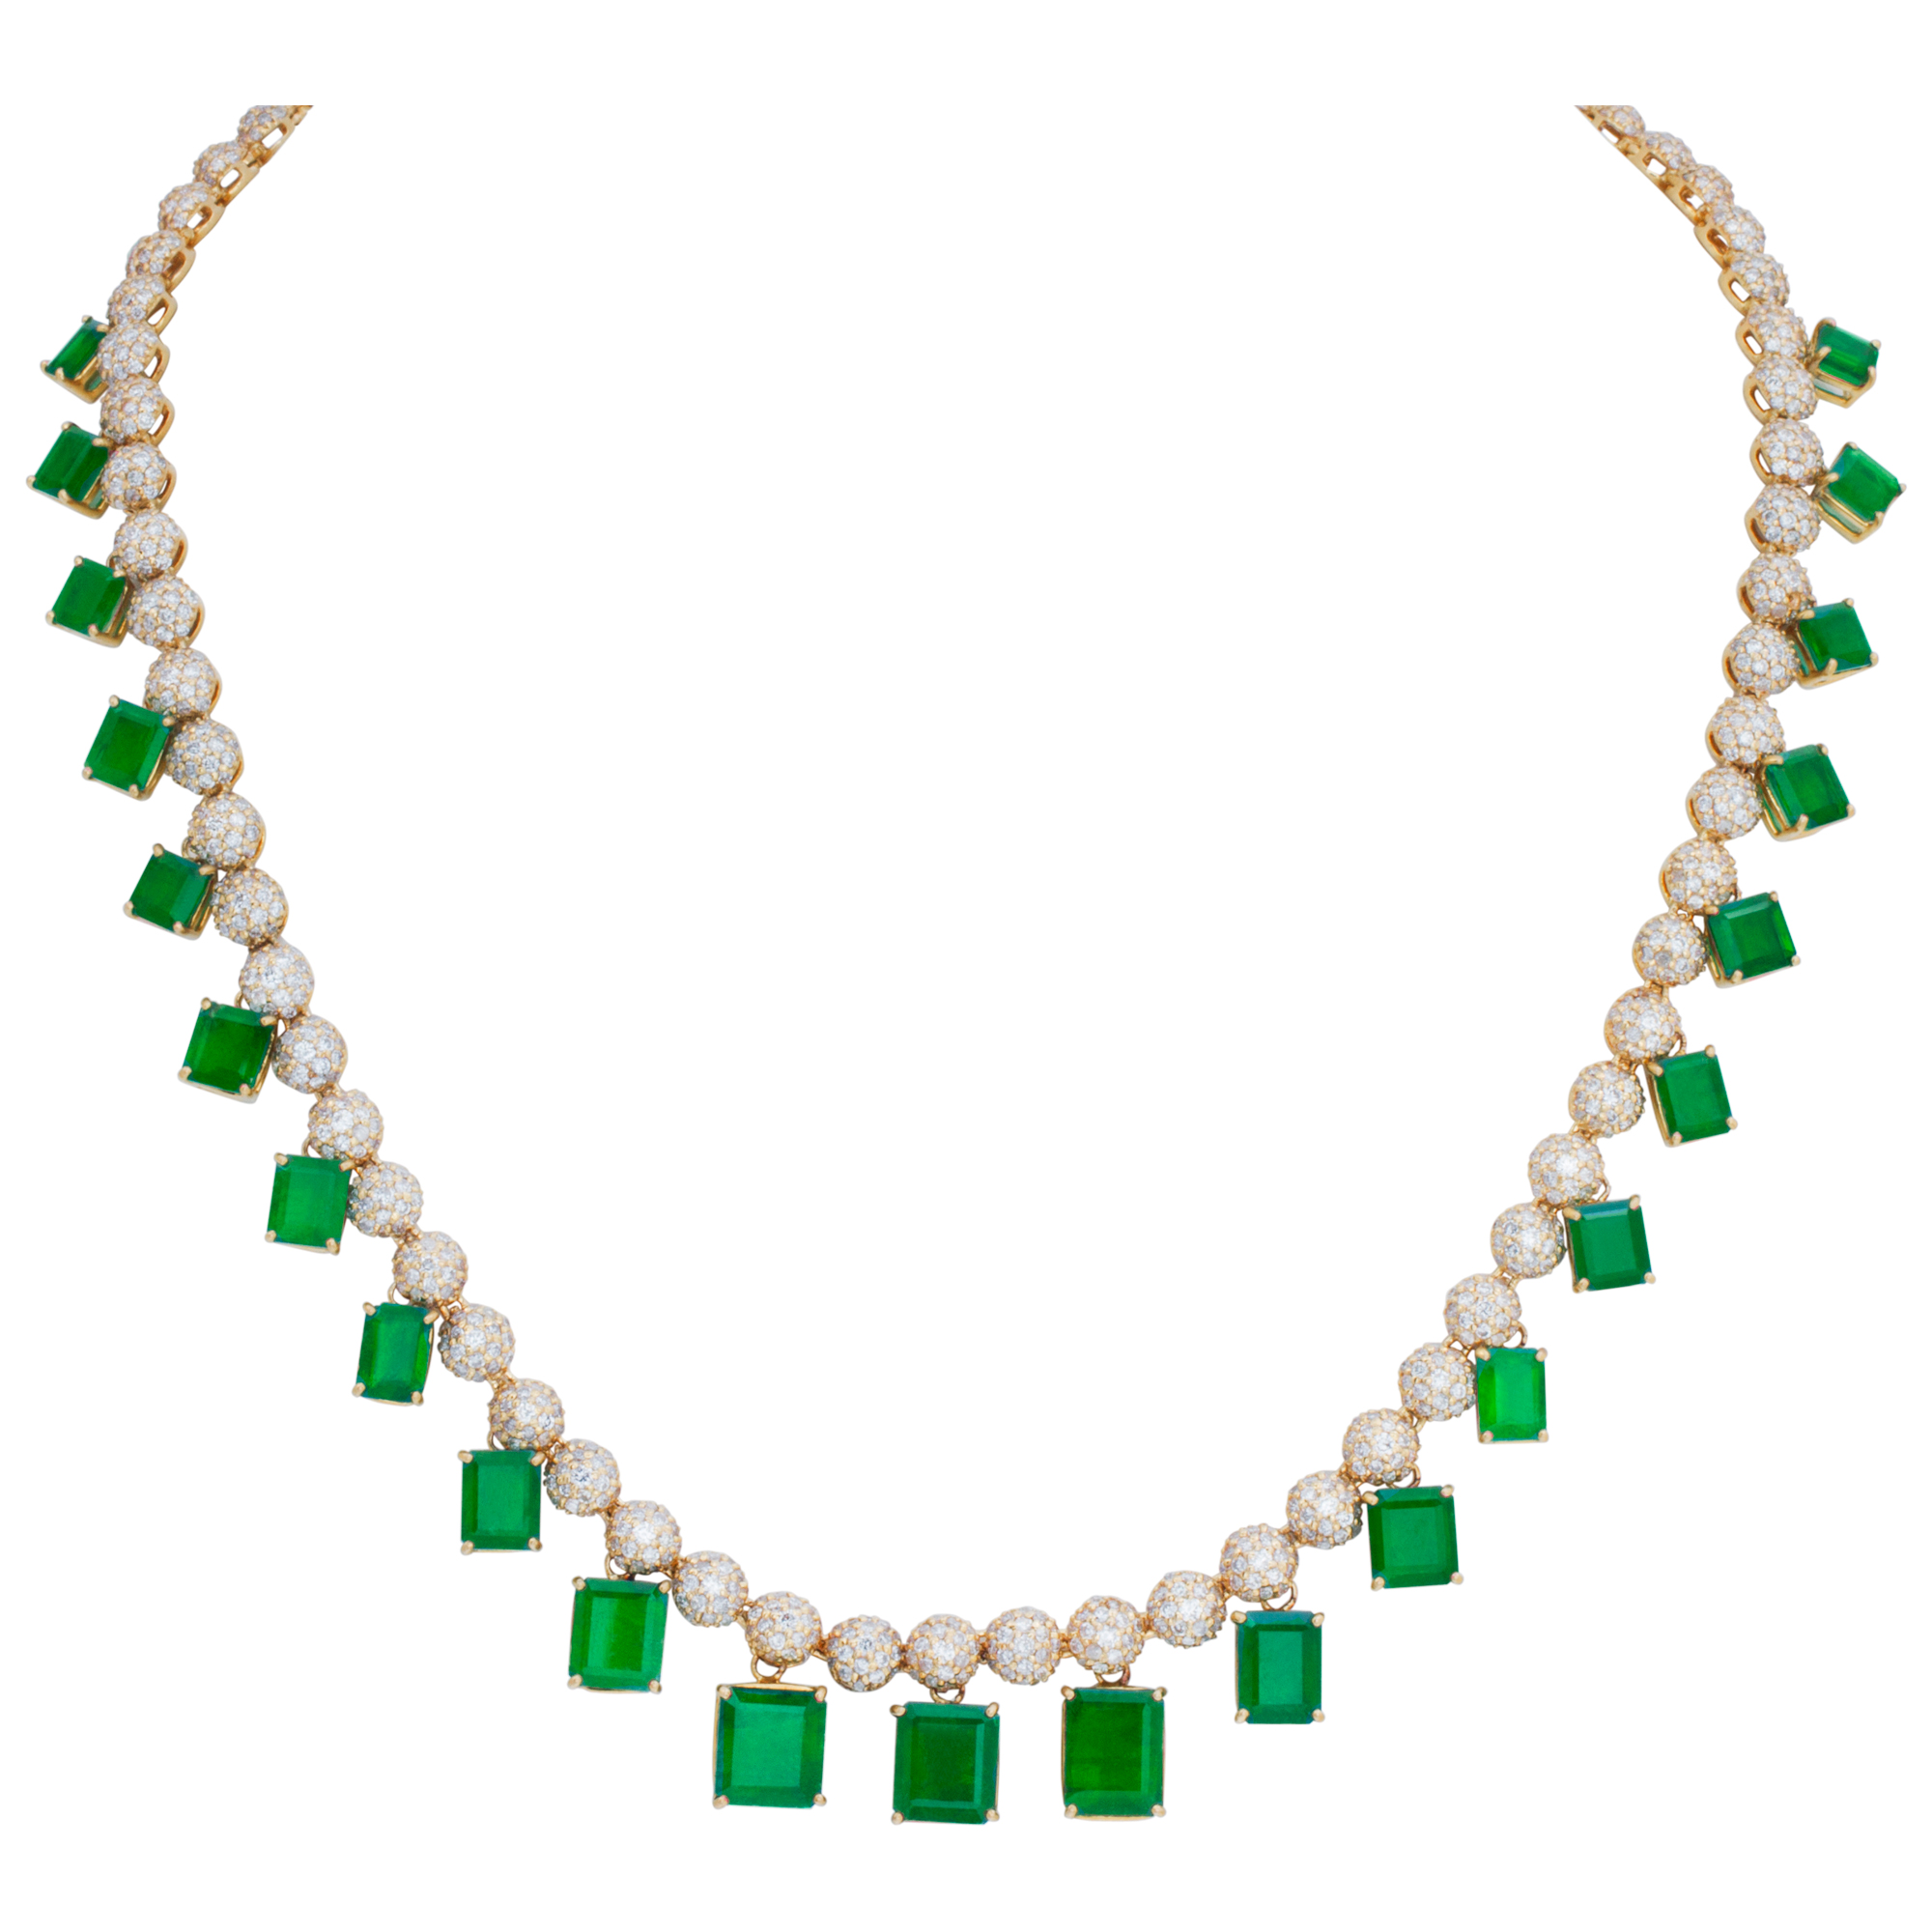 Over 21 carats graduating Emerald cut emeralds & pave diamonds beads necklace, set in 18K yellow gold